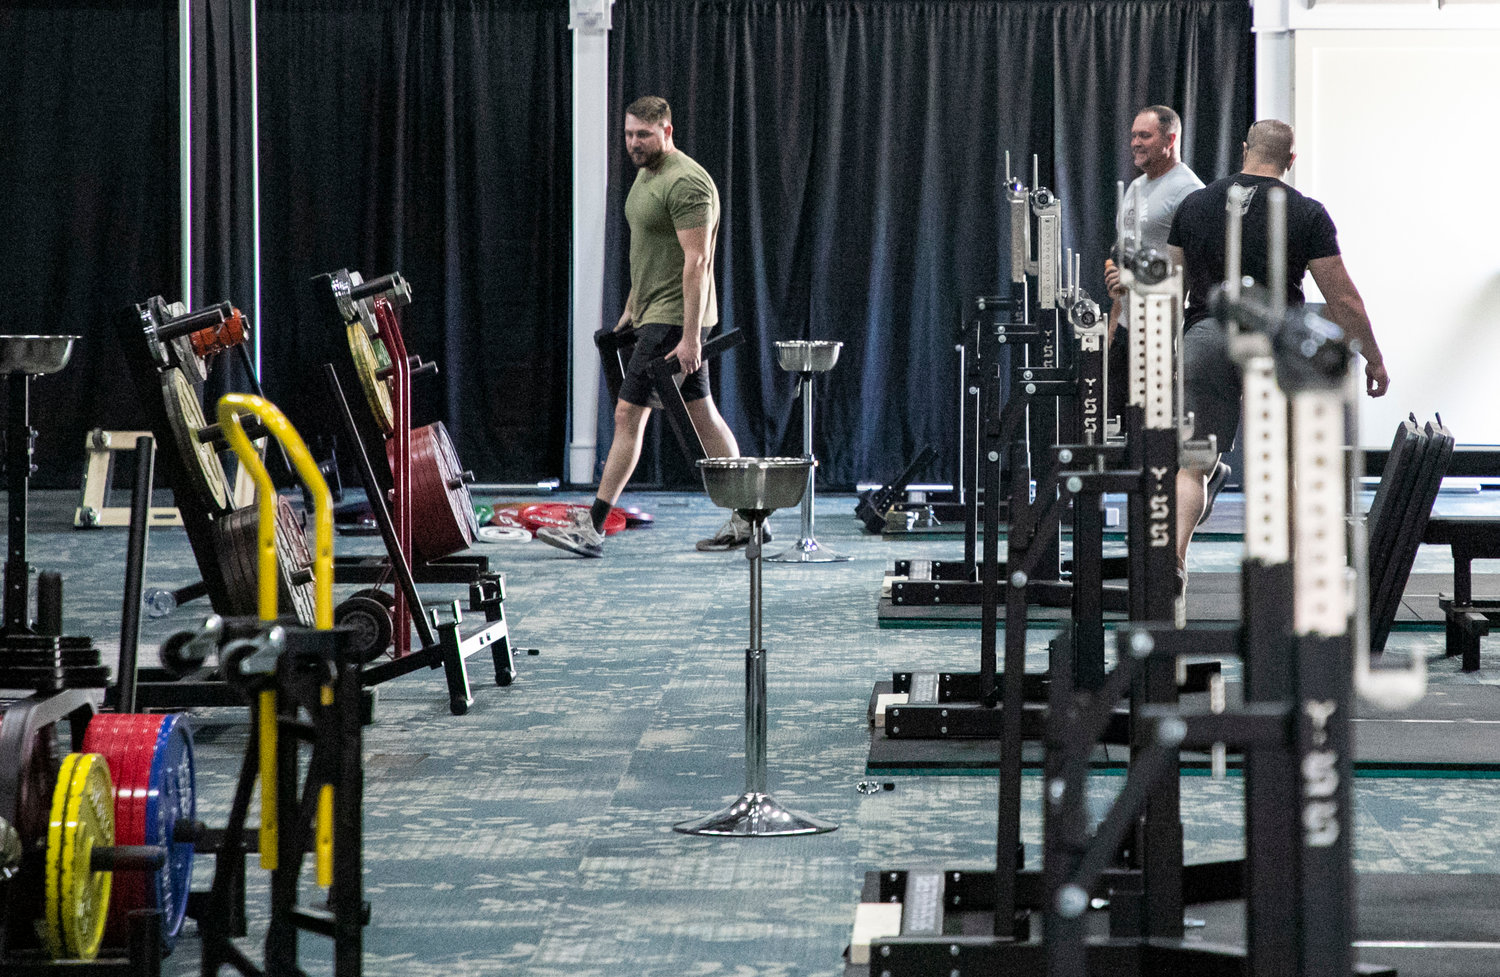 The Orange Beach Event Center is ready to host the IPL World Championships after transforming into a powerlifting arena Wednesday, Oct. 19. The lifting is set to start at 9 a.m. every day from Thursday to Sunday.